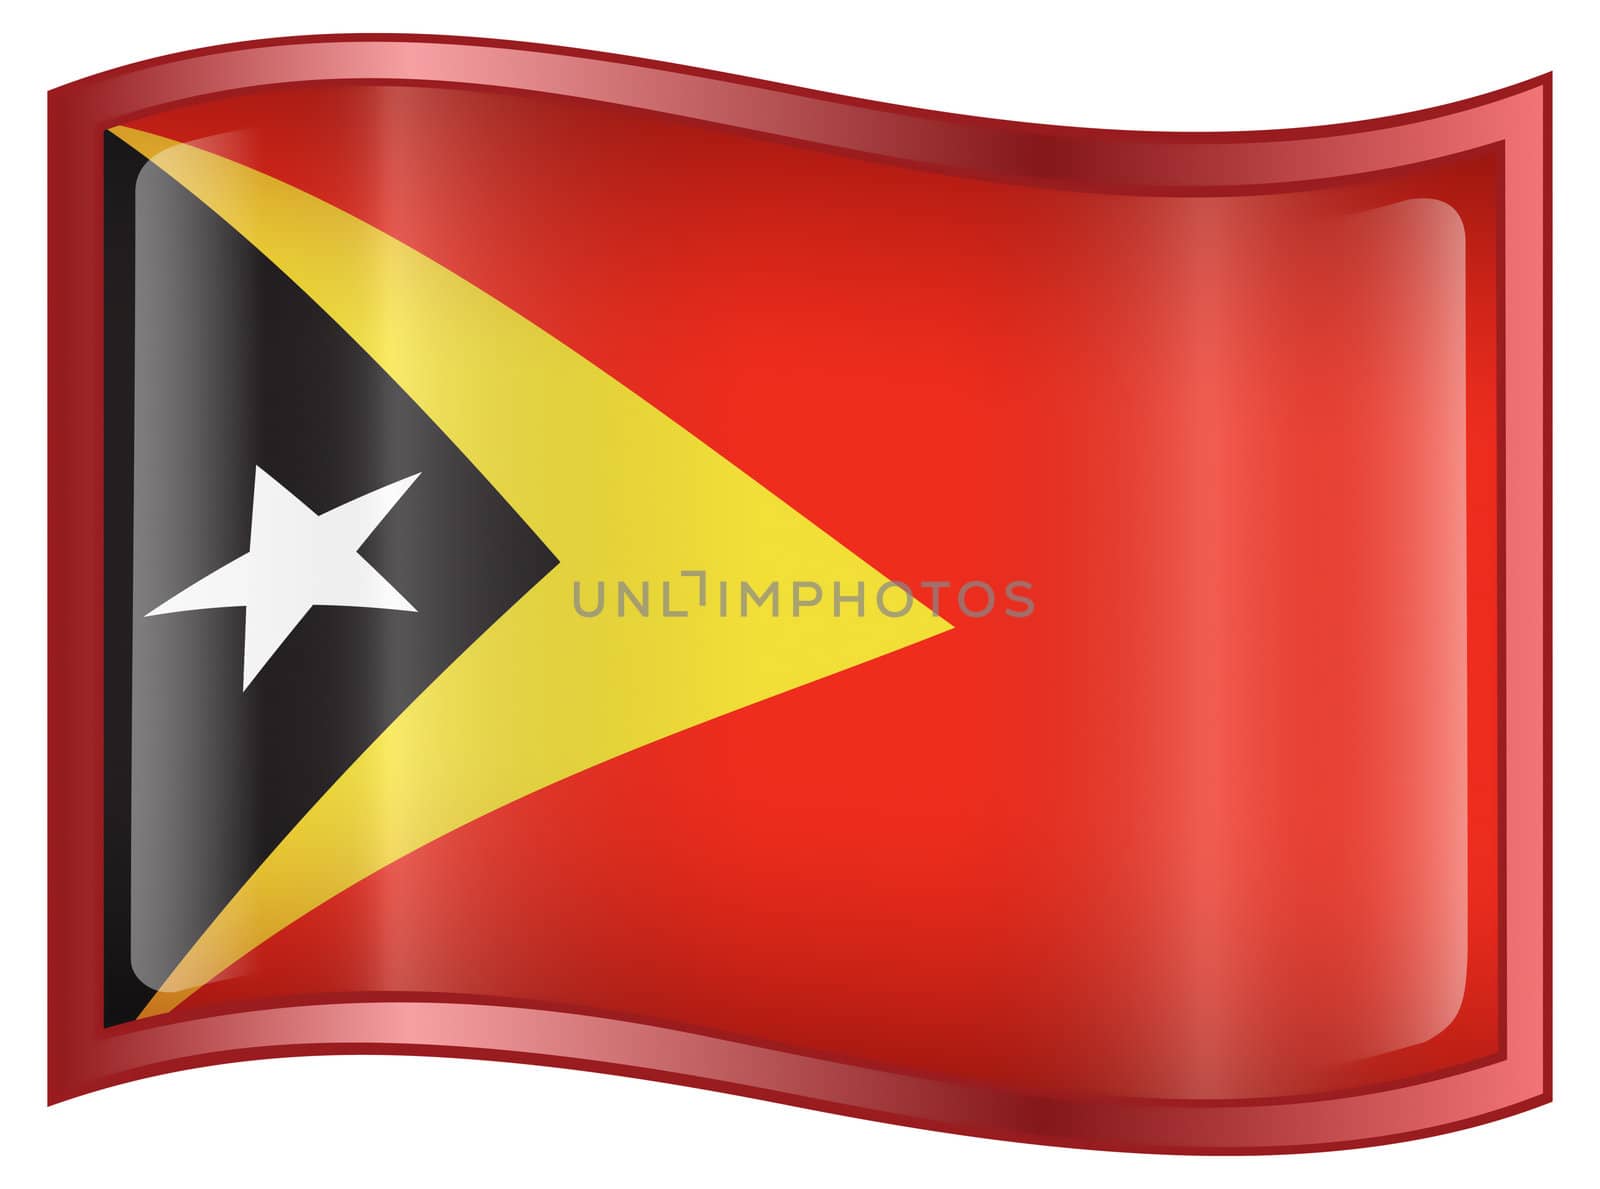 East Timor Flag icon, isolated on white background.